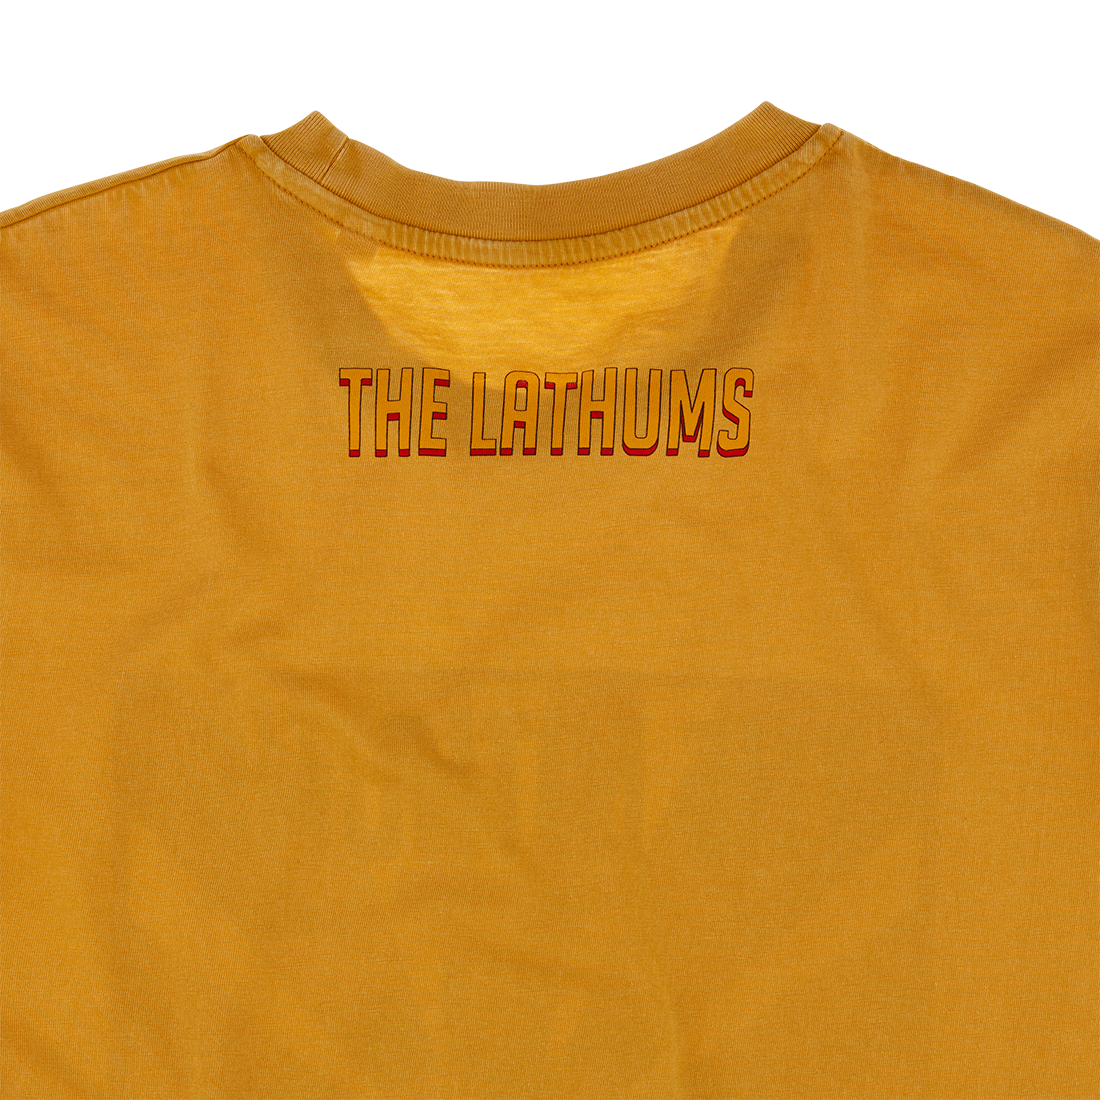 The Lathums - Castlefield Bowl: Limited Edition Tee